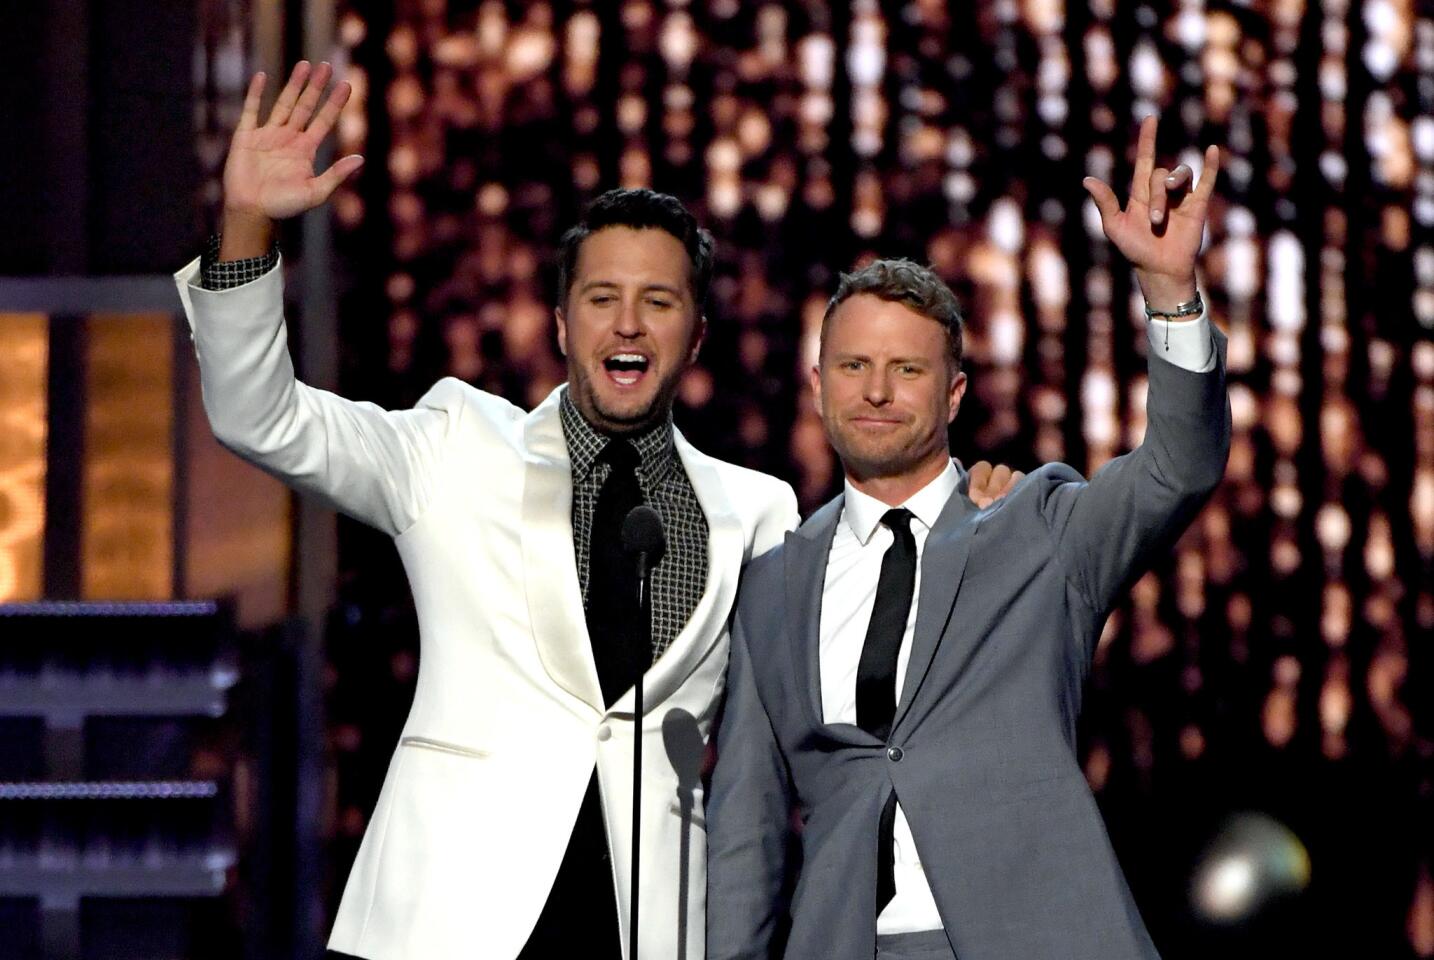 Cohosts Luke Bryan and Dierks Bentley greet the crowd from onstage during the 52nd Academy of Country Music Awards at T-Mobile Arena in Las Vegas.